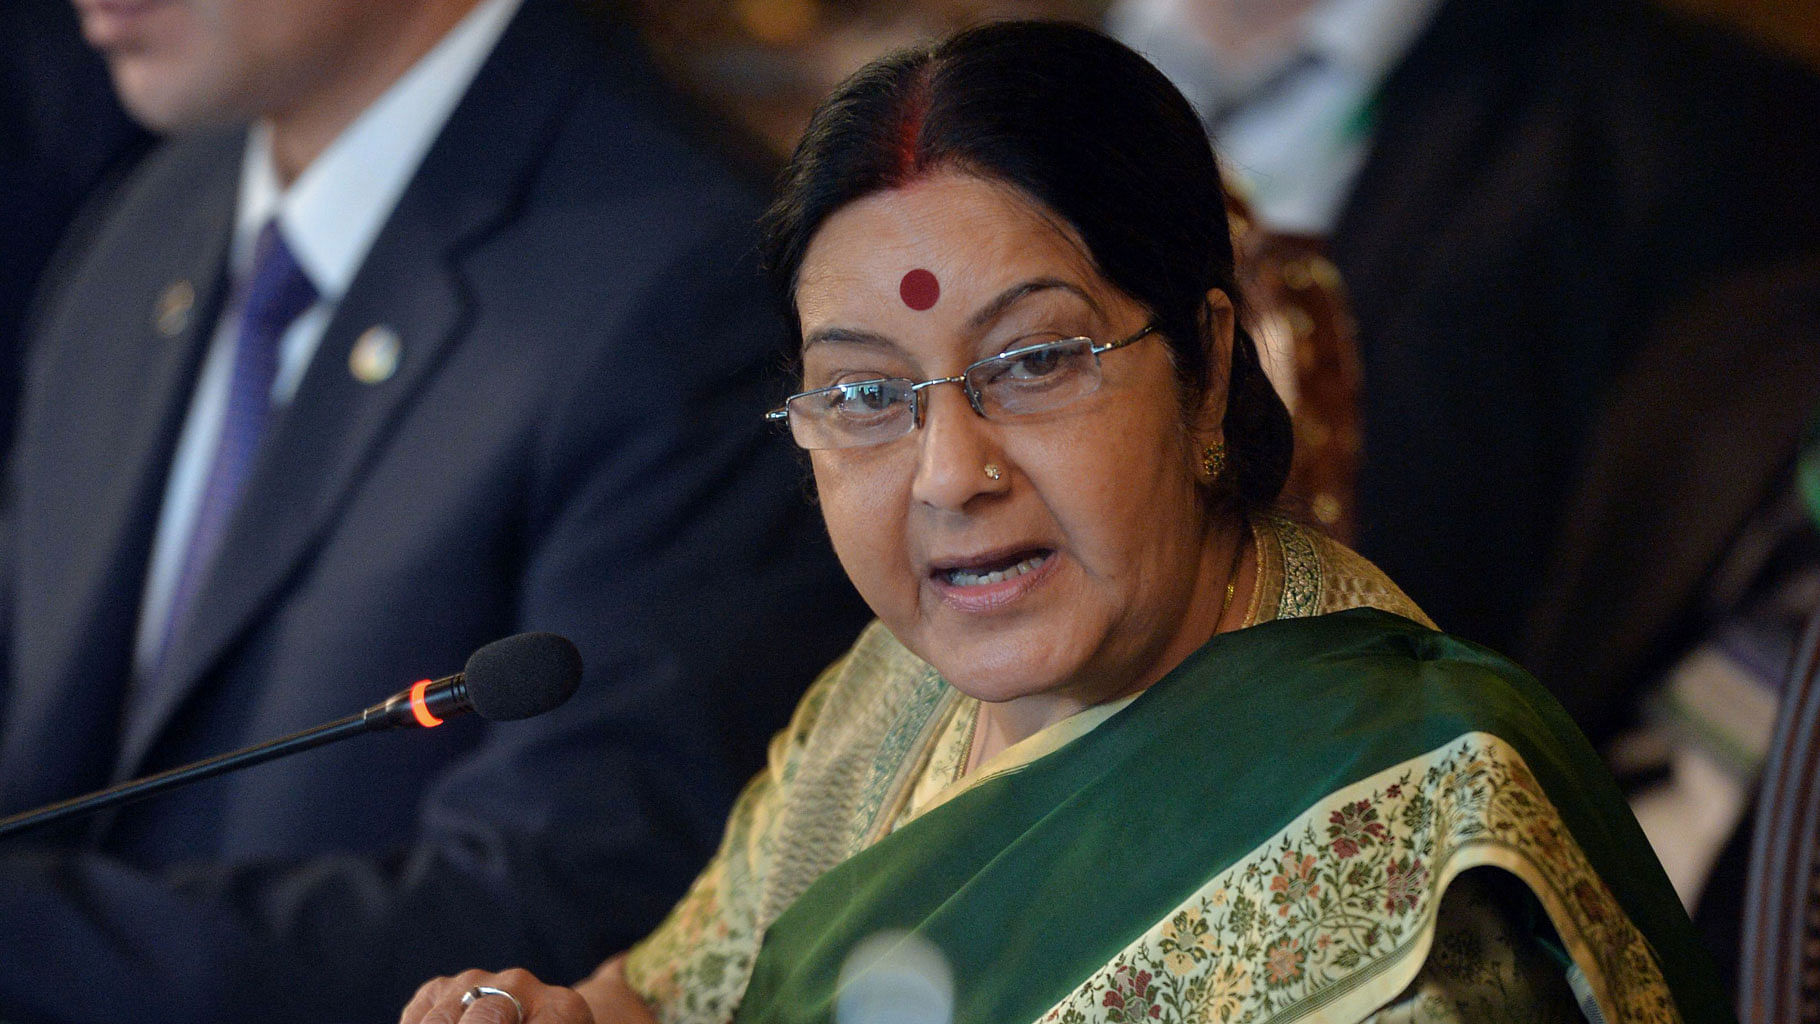 External Affairs Minister Sushma Swaraj at the Heart of Asia conference in Islamabad, Pakistan on Wednesday, December 9, 2015. (Photo: AP)